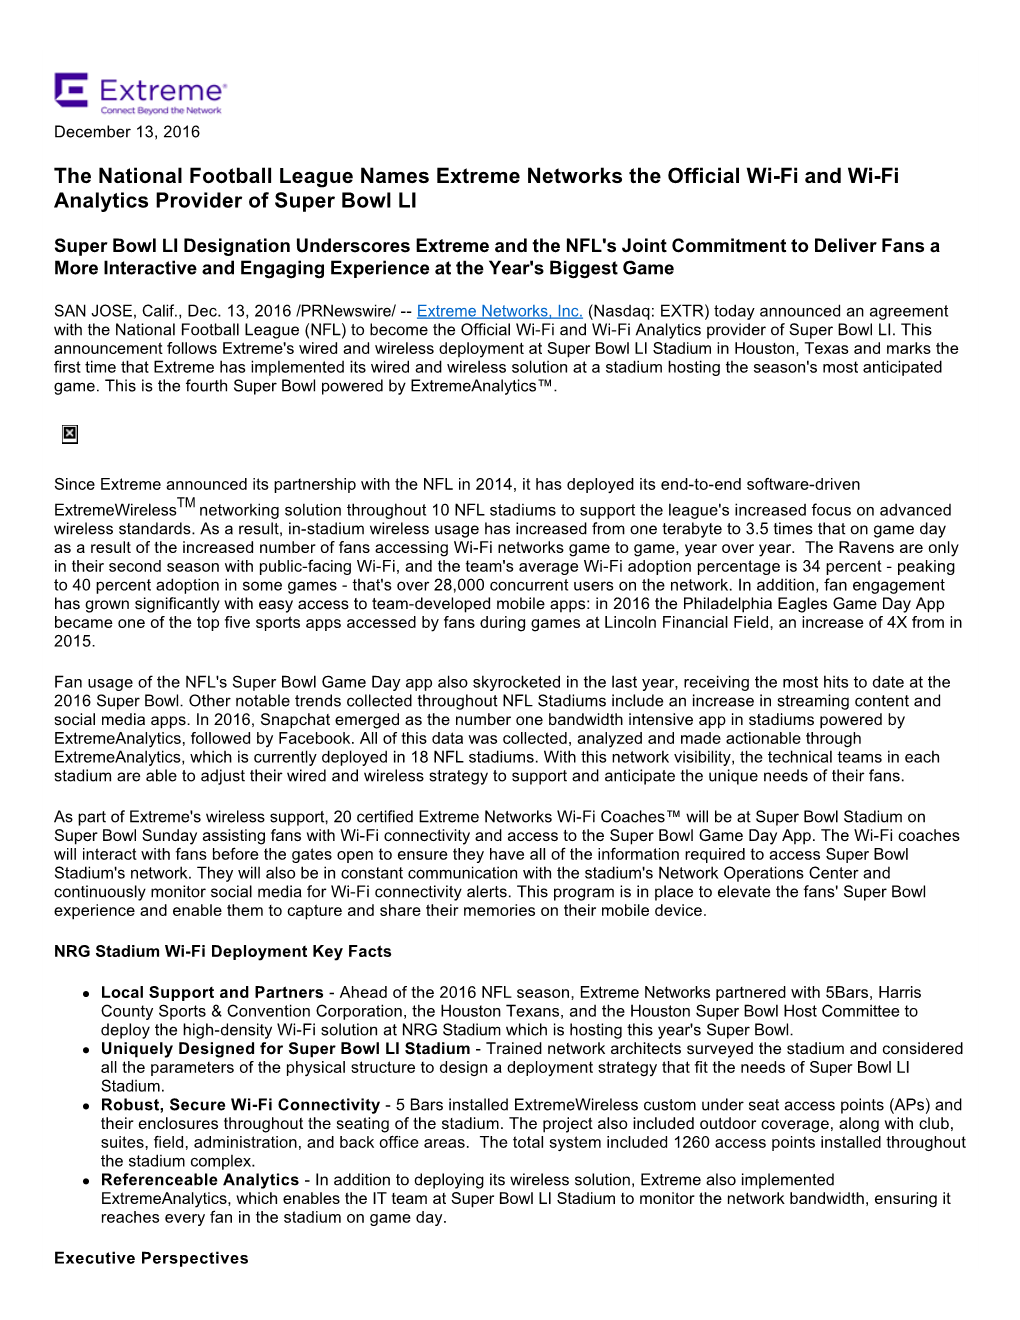 The National Football League Names Extreme Networks the Official Wi-Fi and Wi-Fi Analytics Provider of Super Bowl LI